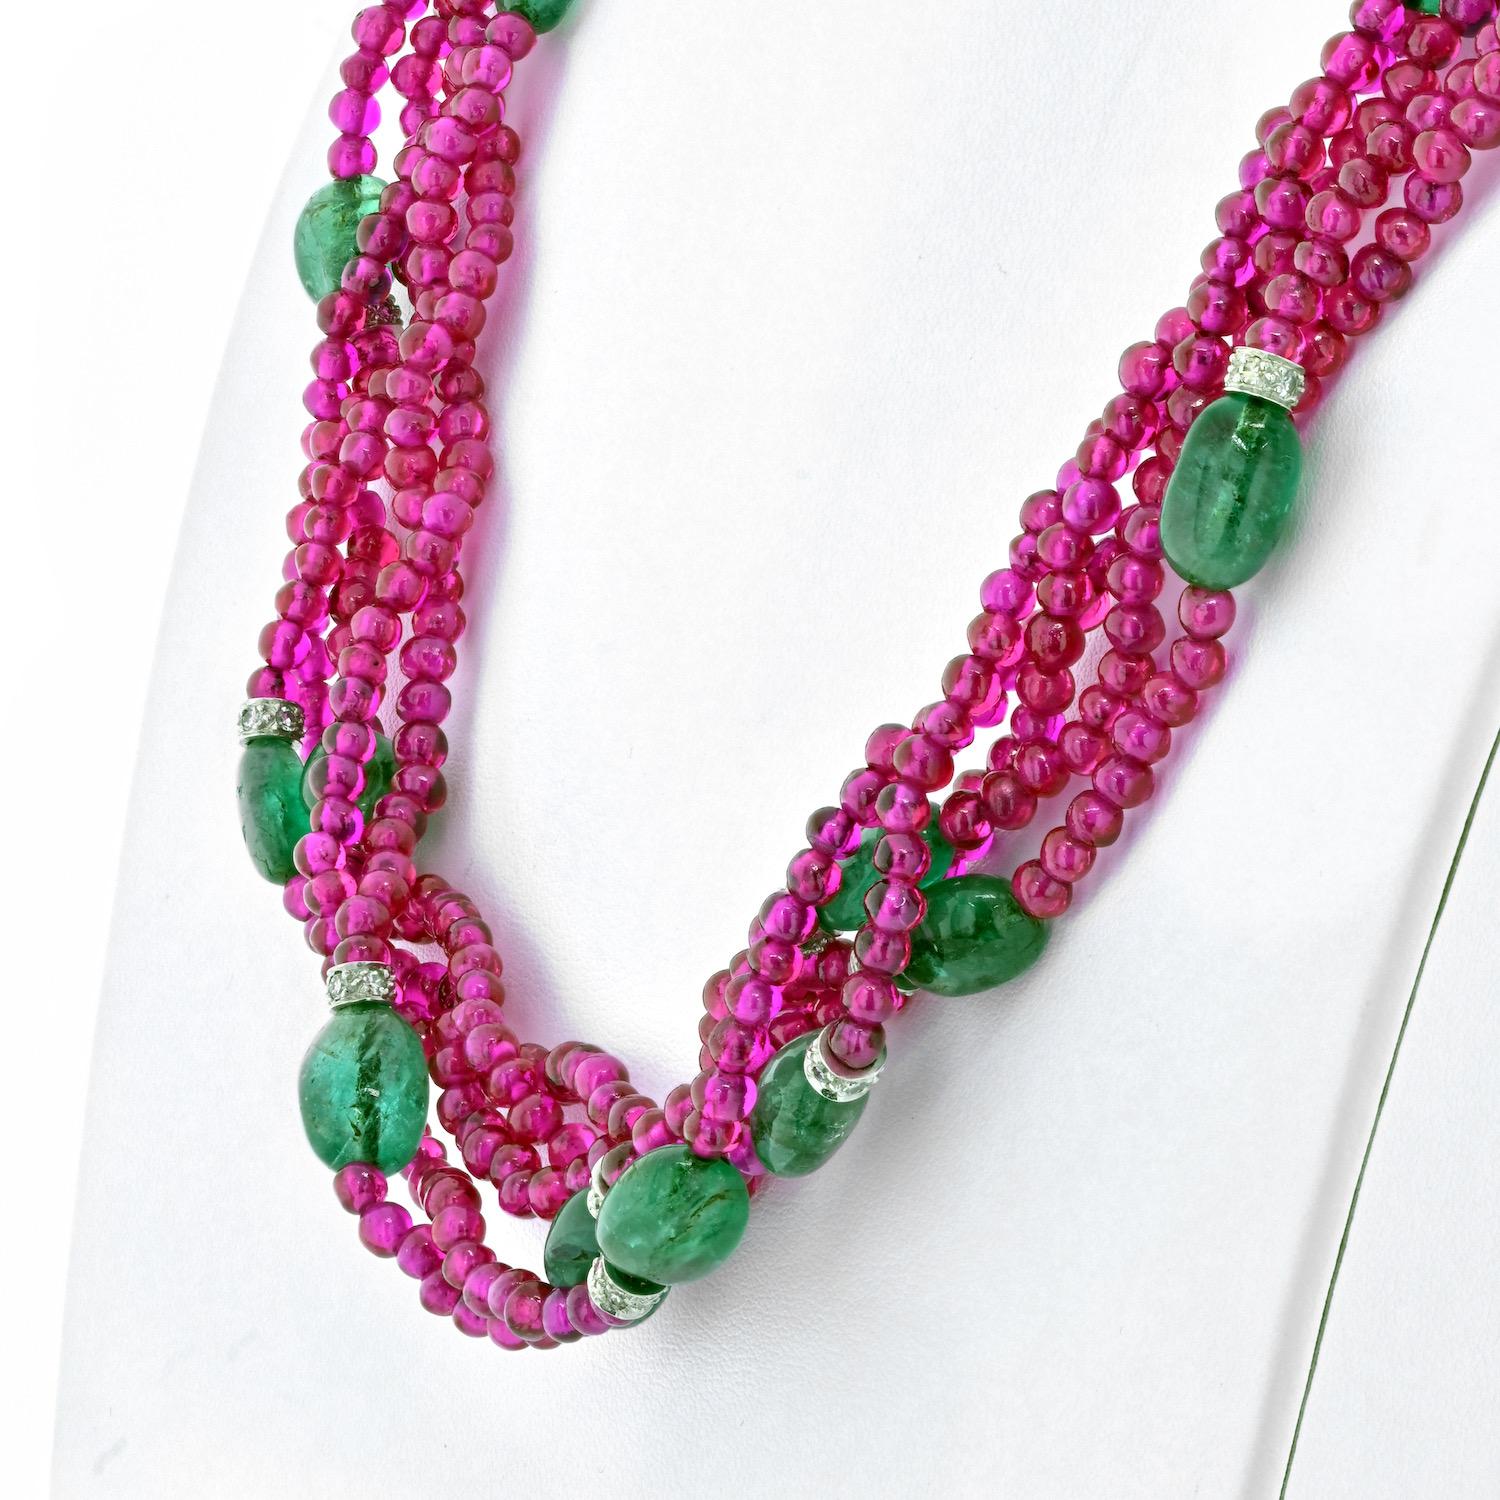 Modern David Webb 18K White Gold 5 Strand Of Ruby And Sapphires Necklace For Sale